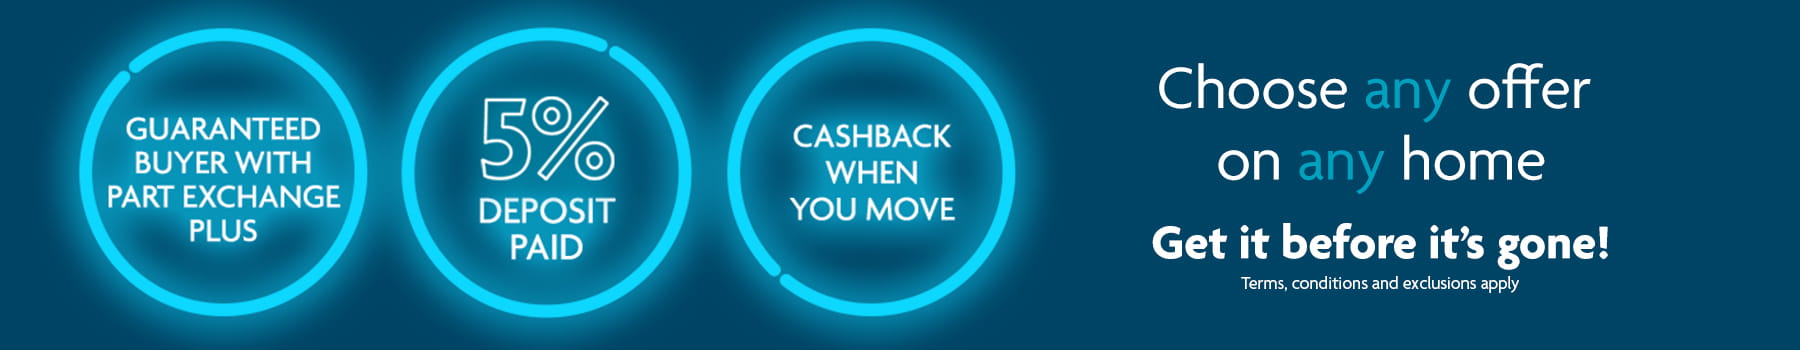 Home purchase cashback benefits